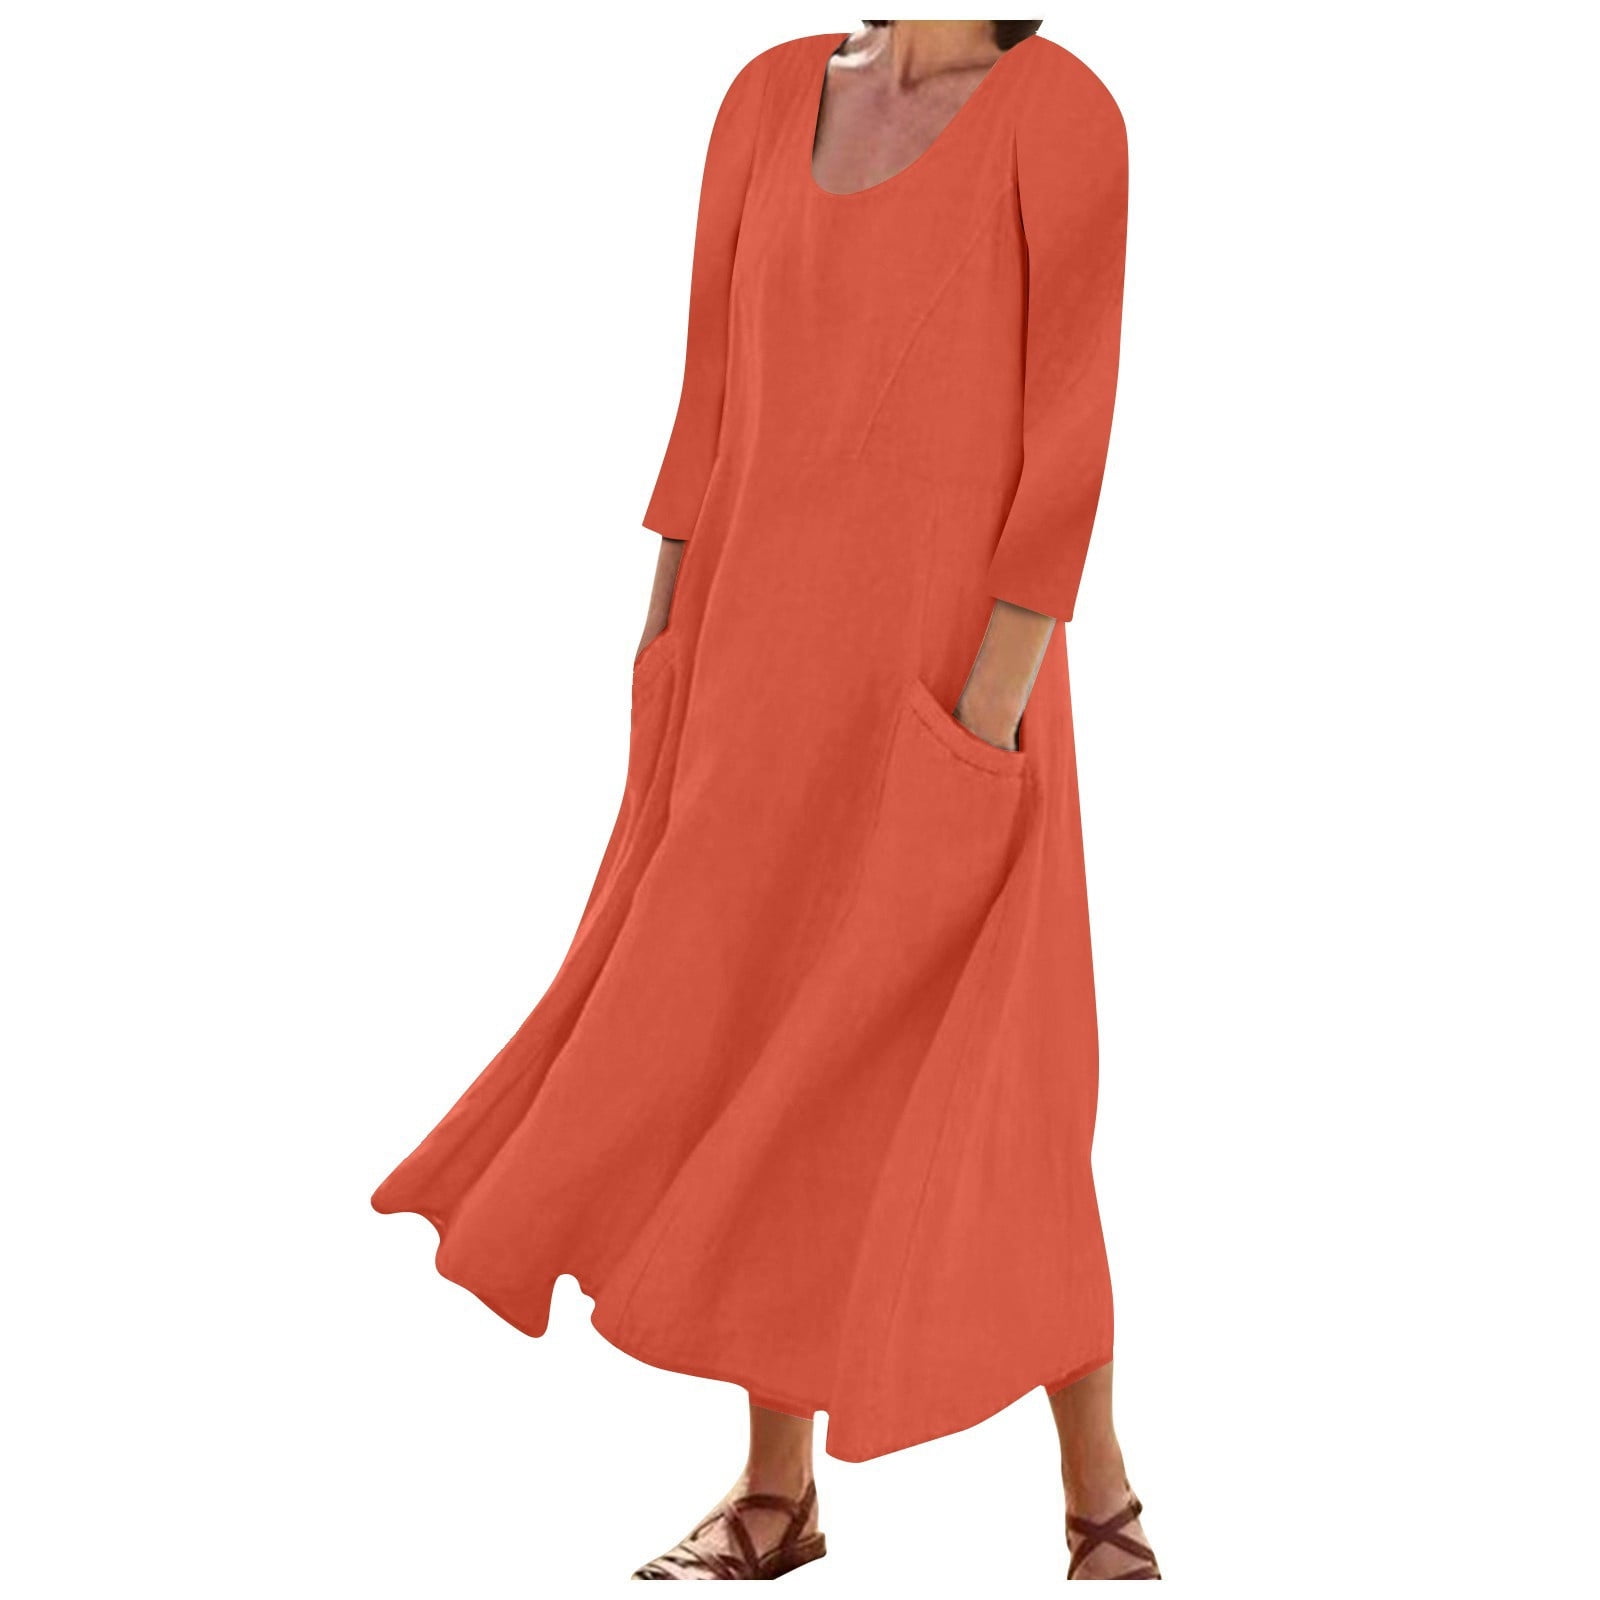 FAFWYP Women's Casual Flowy Long Maxi Dress Solid Color 3/4